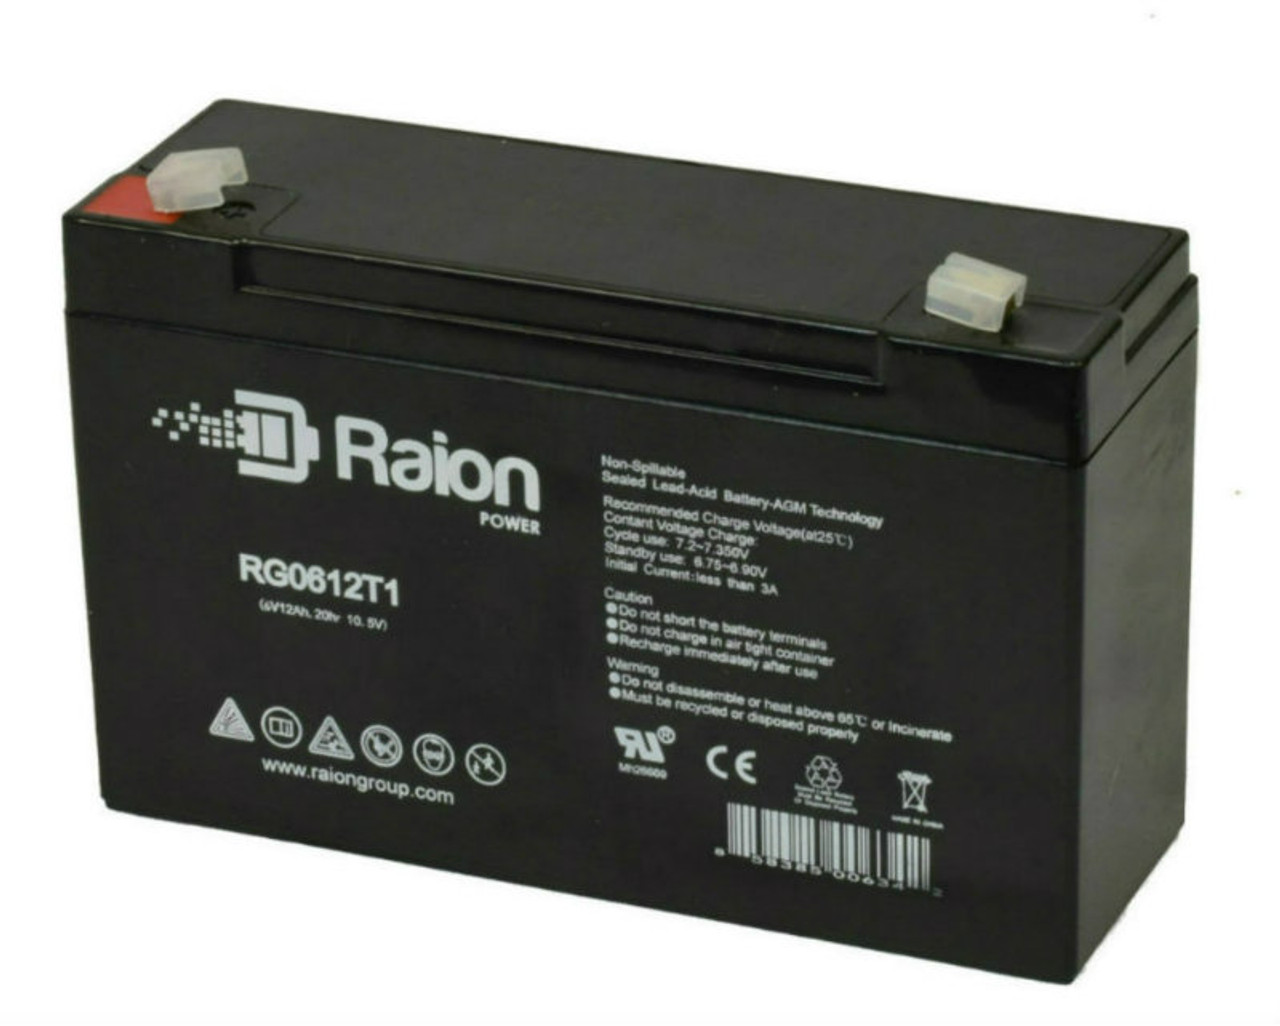 Raion Power RG06120T1 6V 12Ah Replacement UPS Battery Cartridge for ONEAC ON900